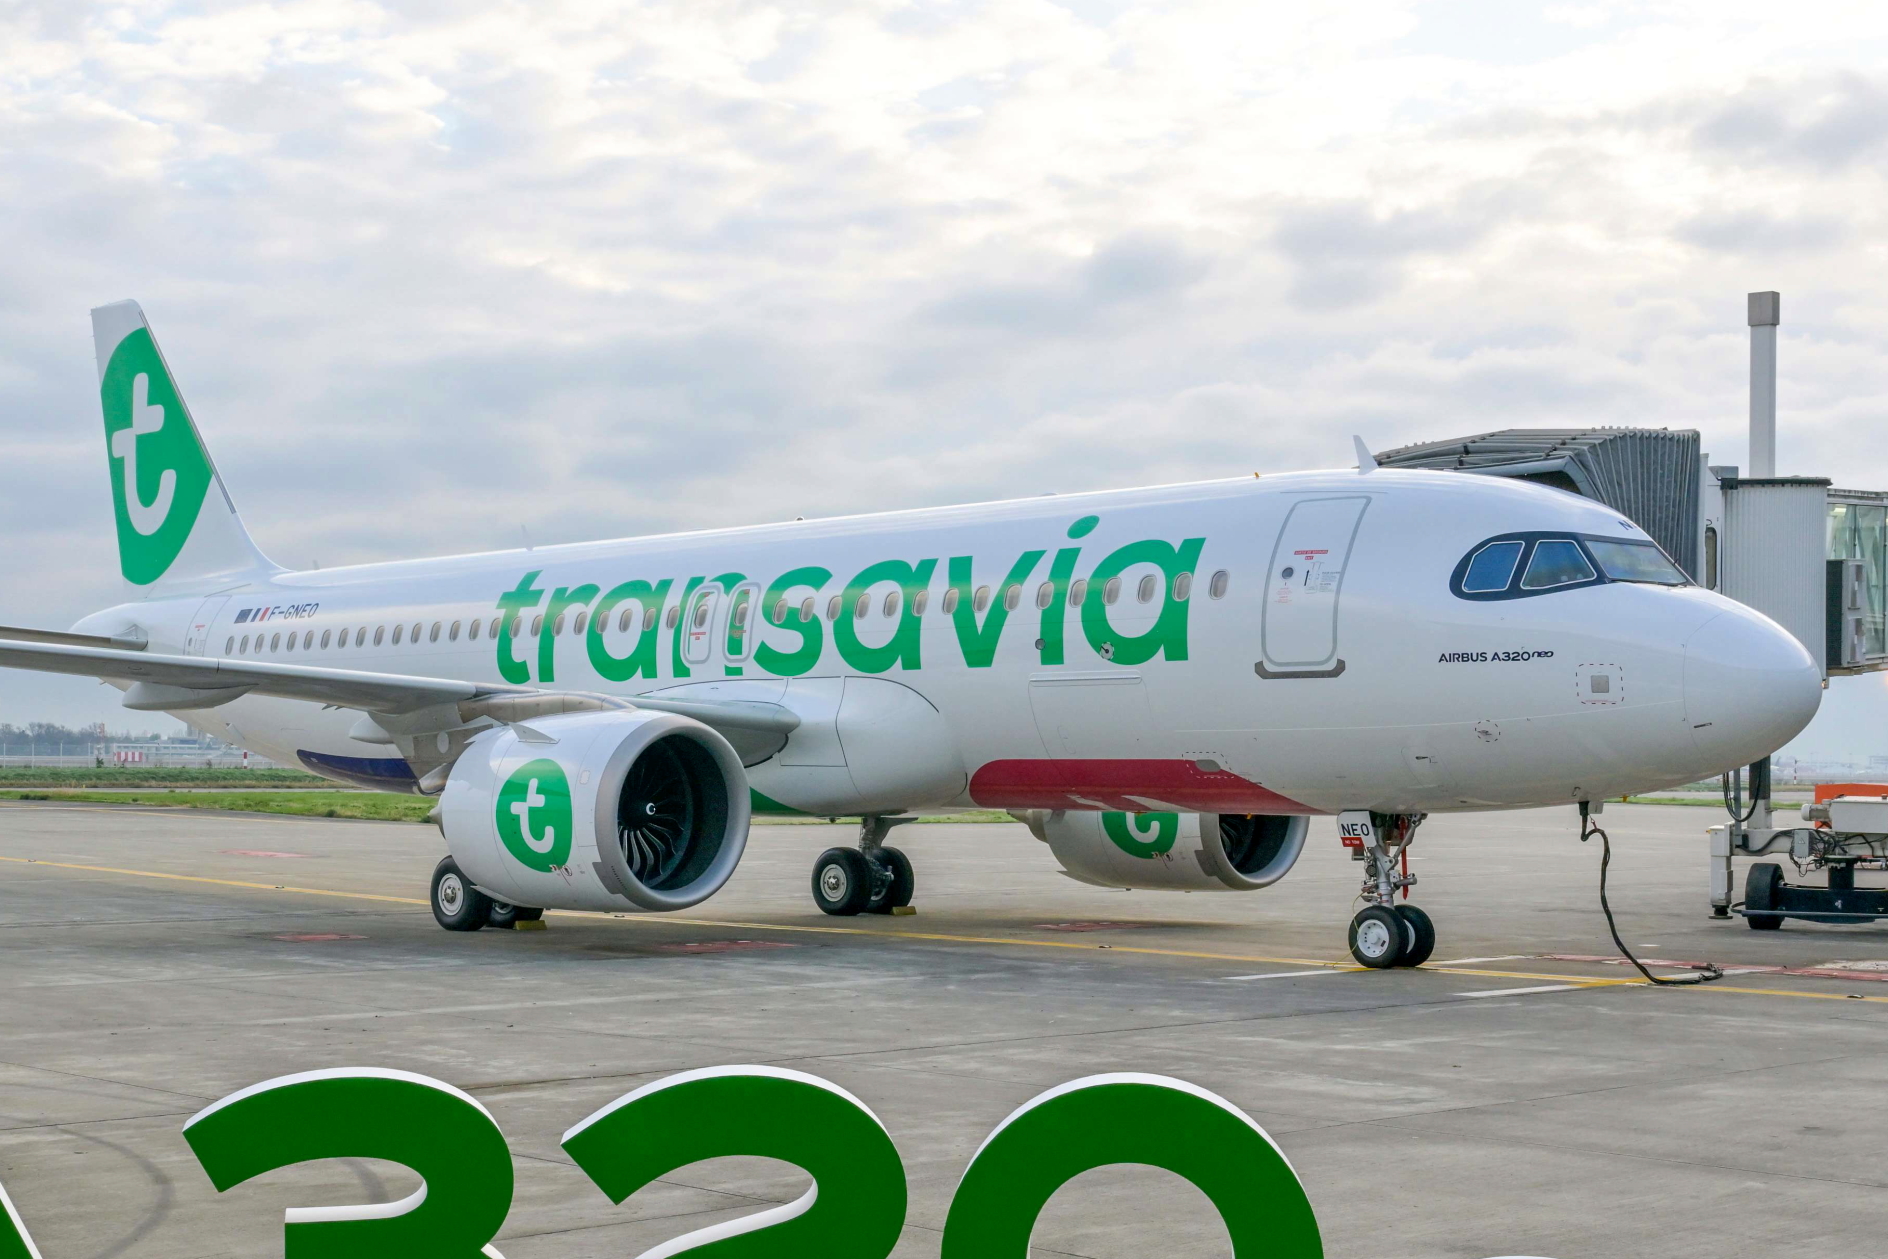 Transavia's first Airbus A320neo. Click to enlarge.